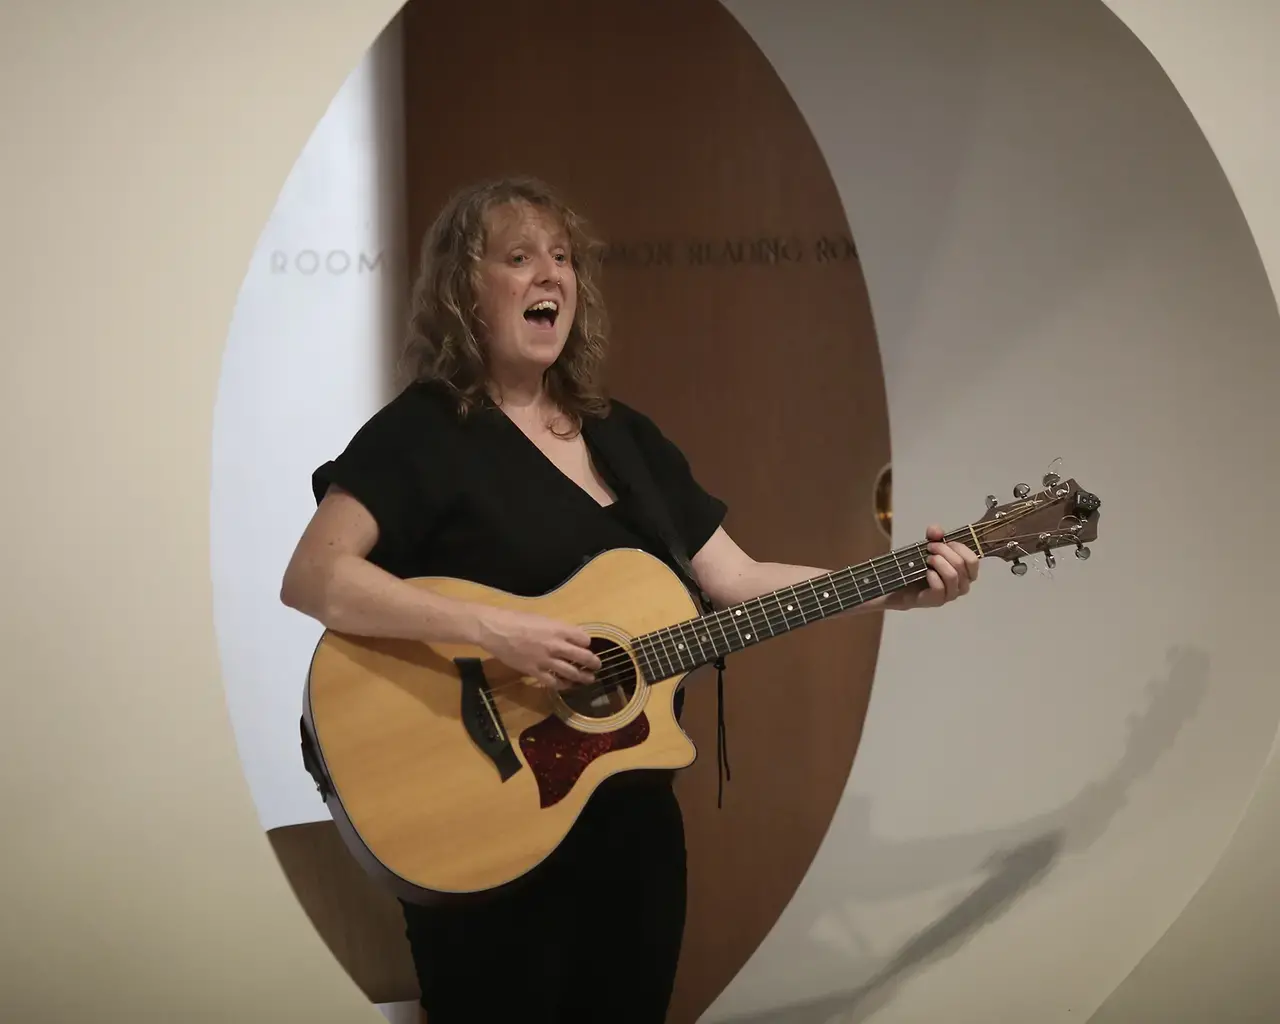 Pew Fellow Emily Bate performs at the Guggenheim Museum, 2021, New York, NY. Photo by Paula Court.